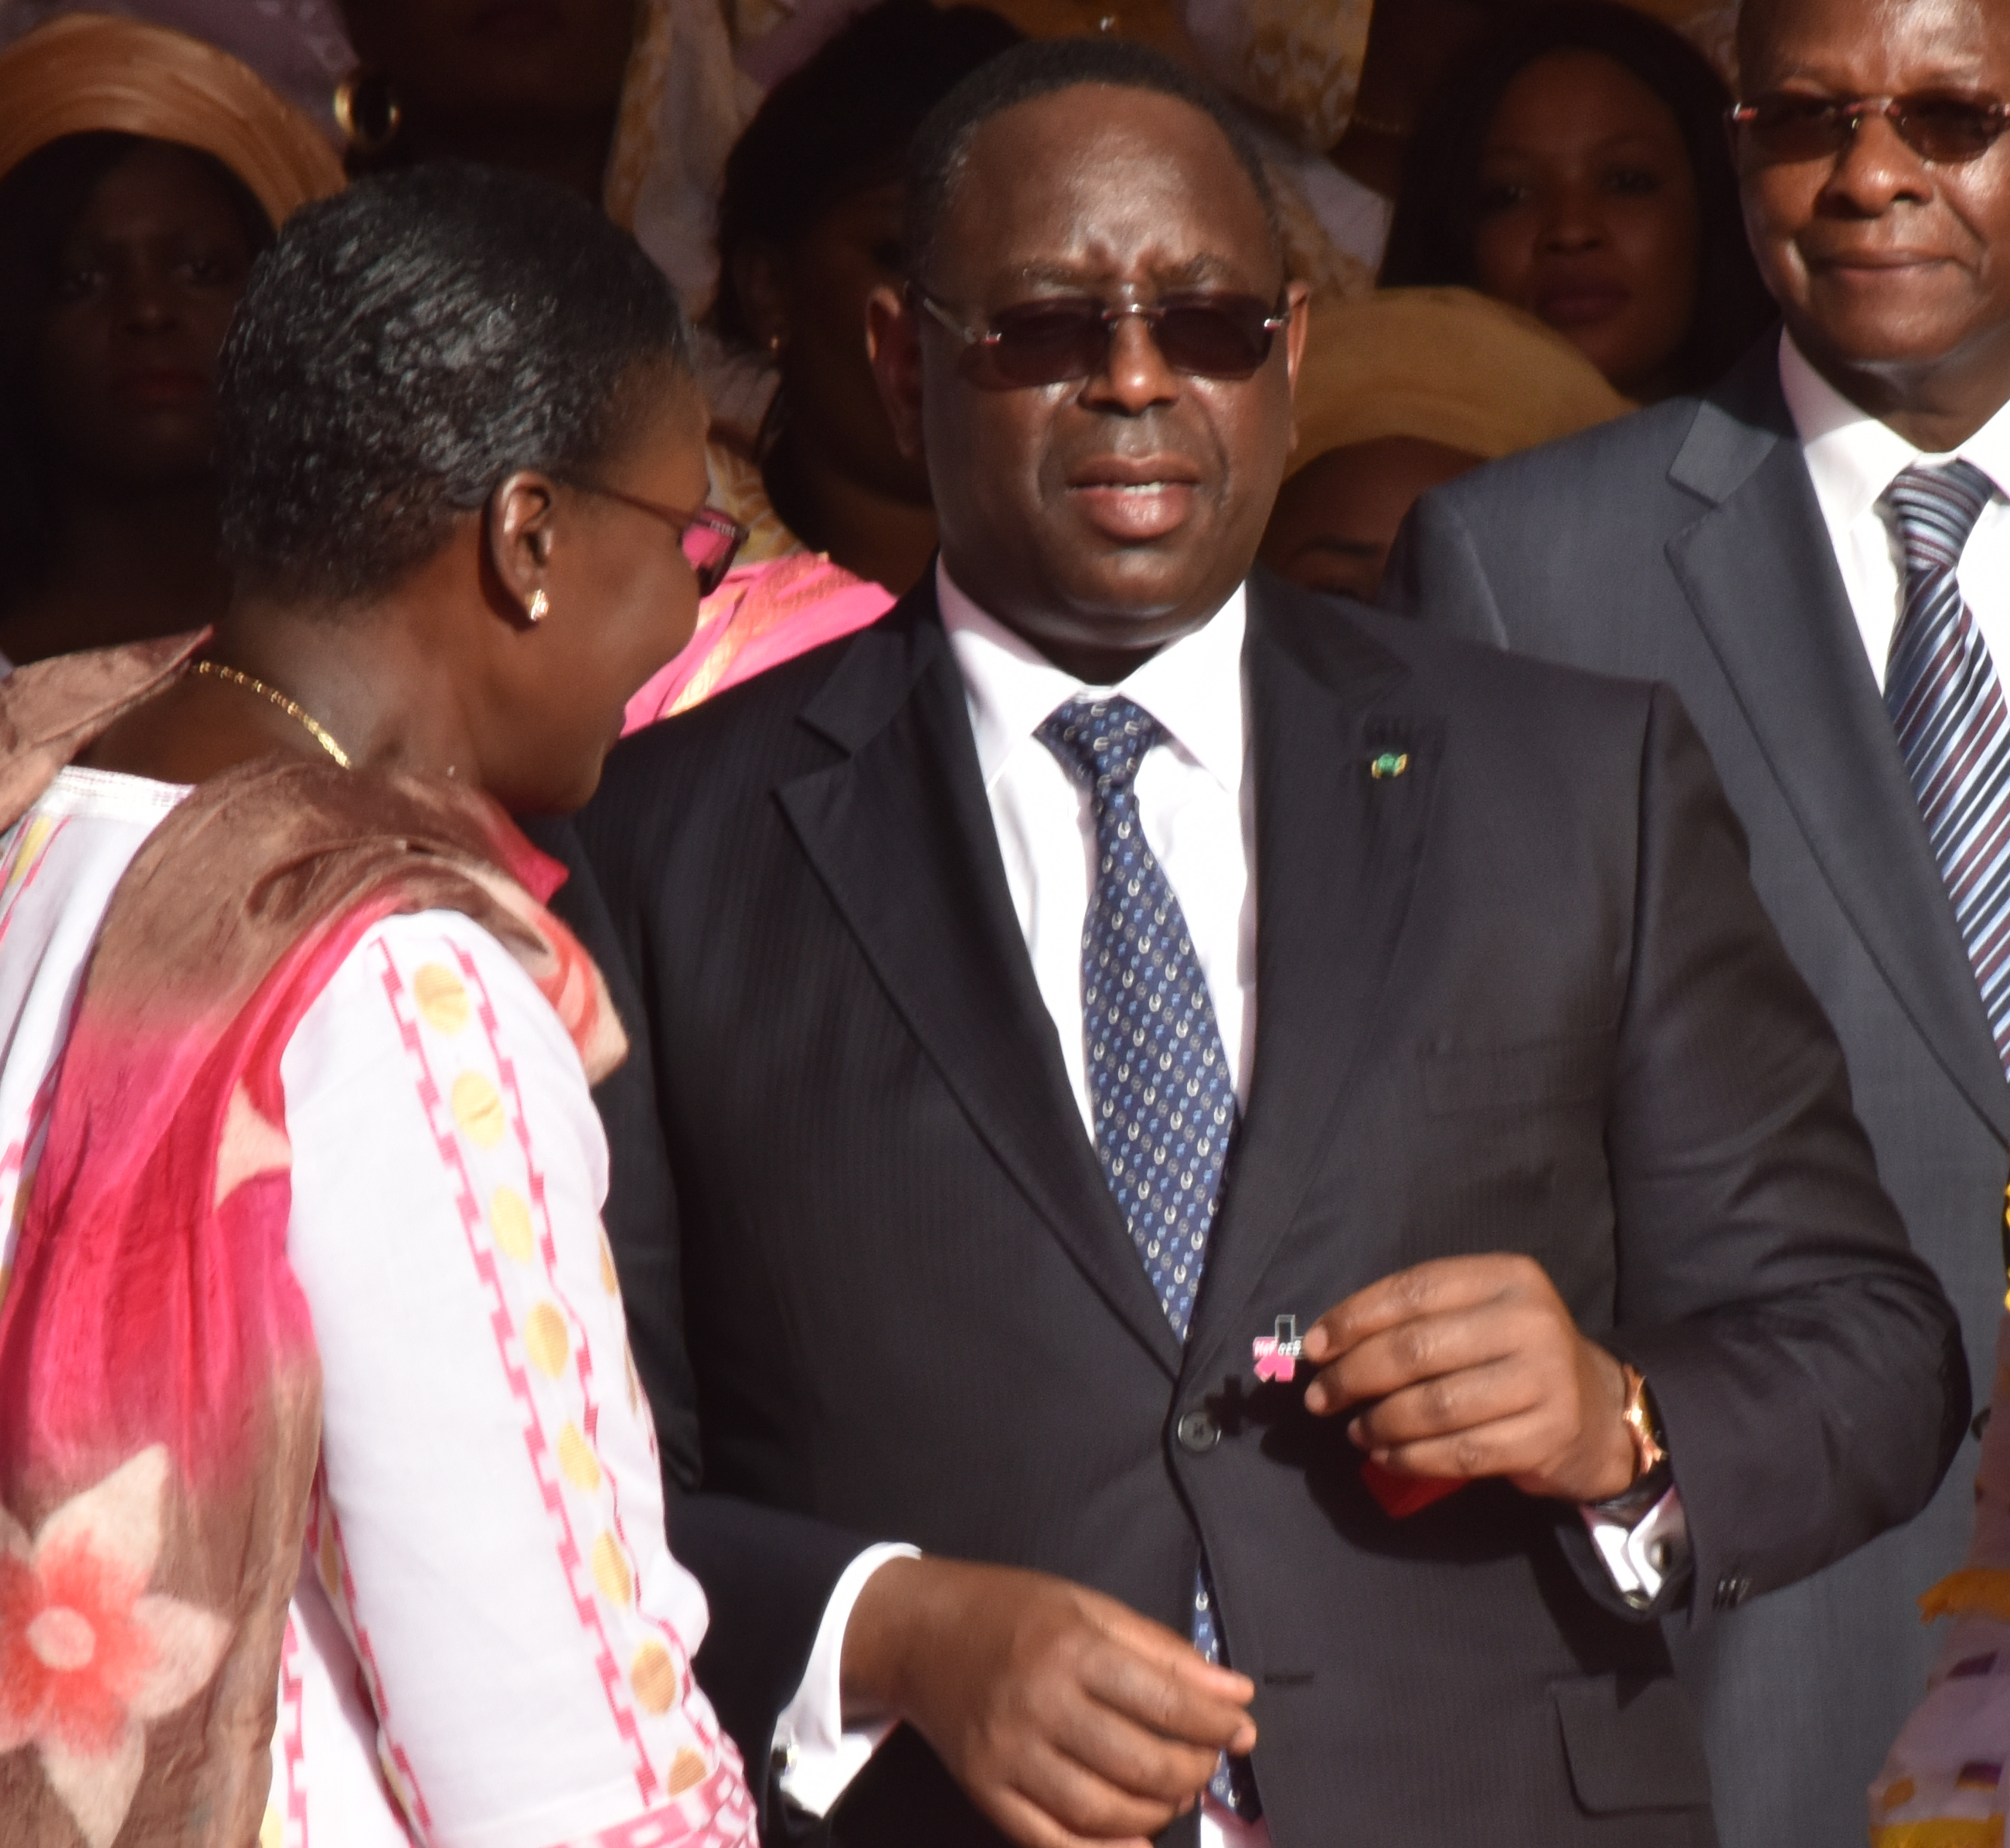 President of the Republic of Senegal, HE Mr. Macky Sall receiving the He For She pin